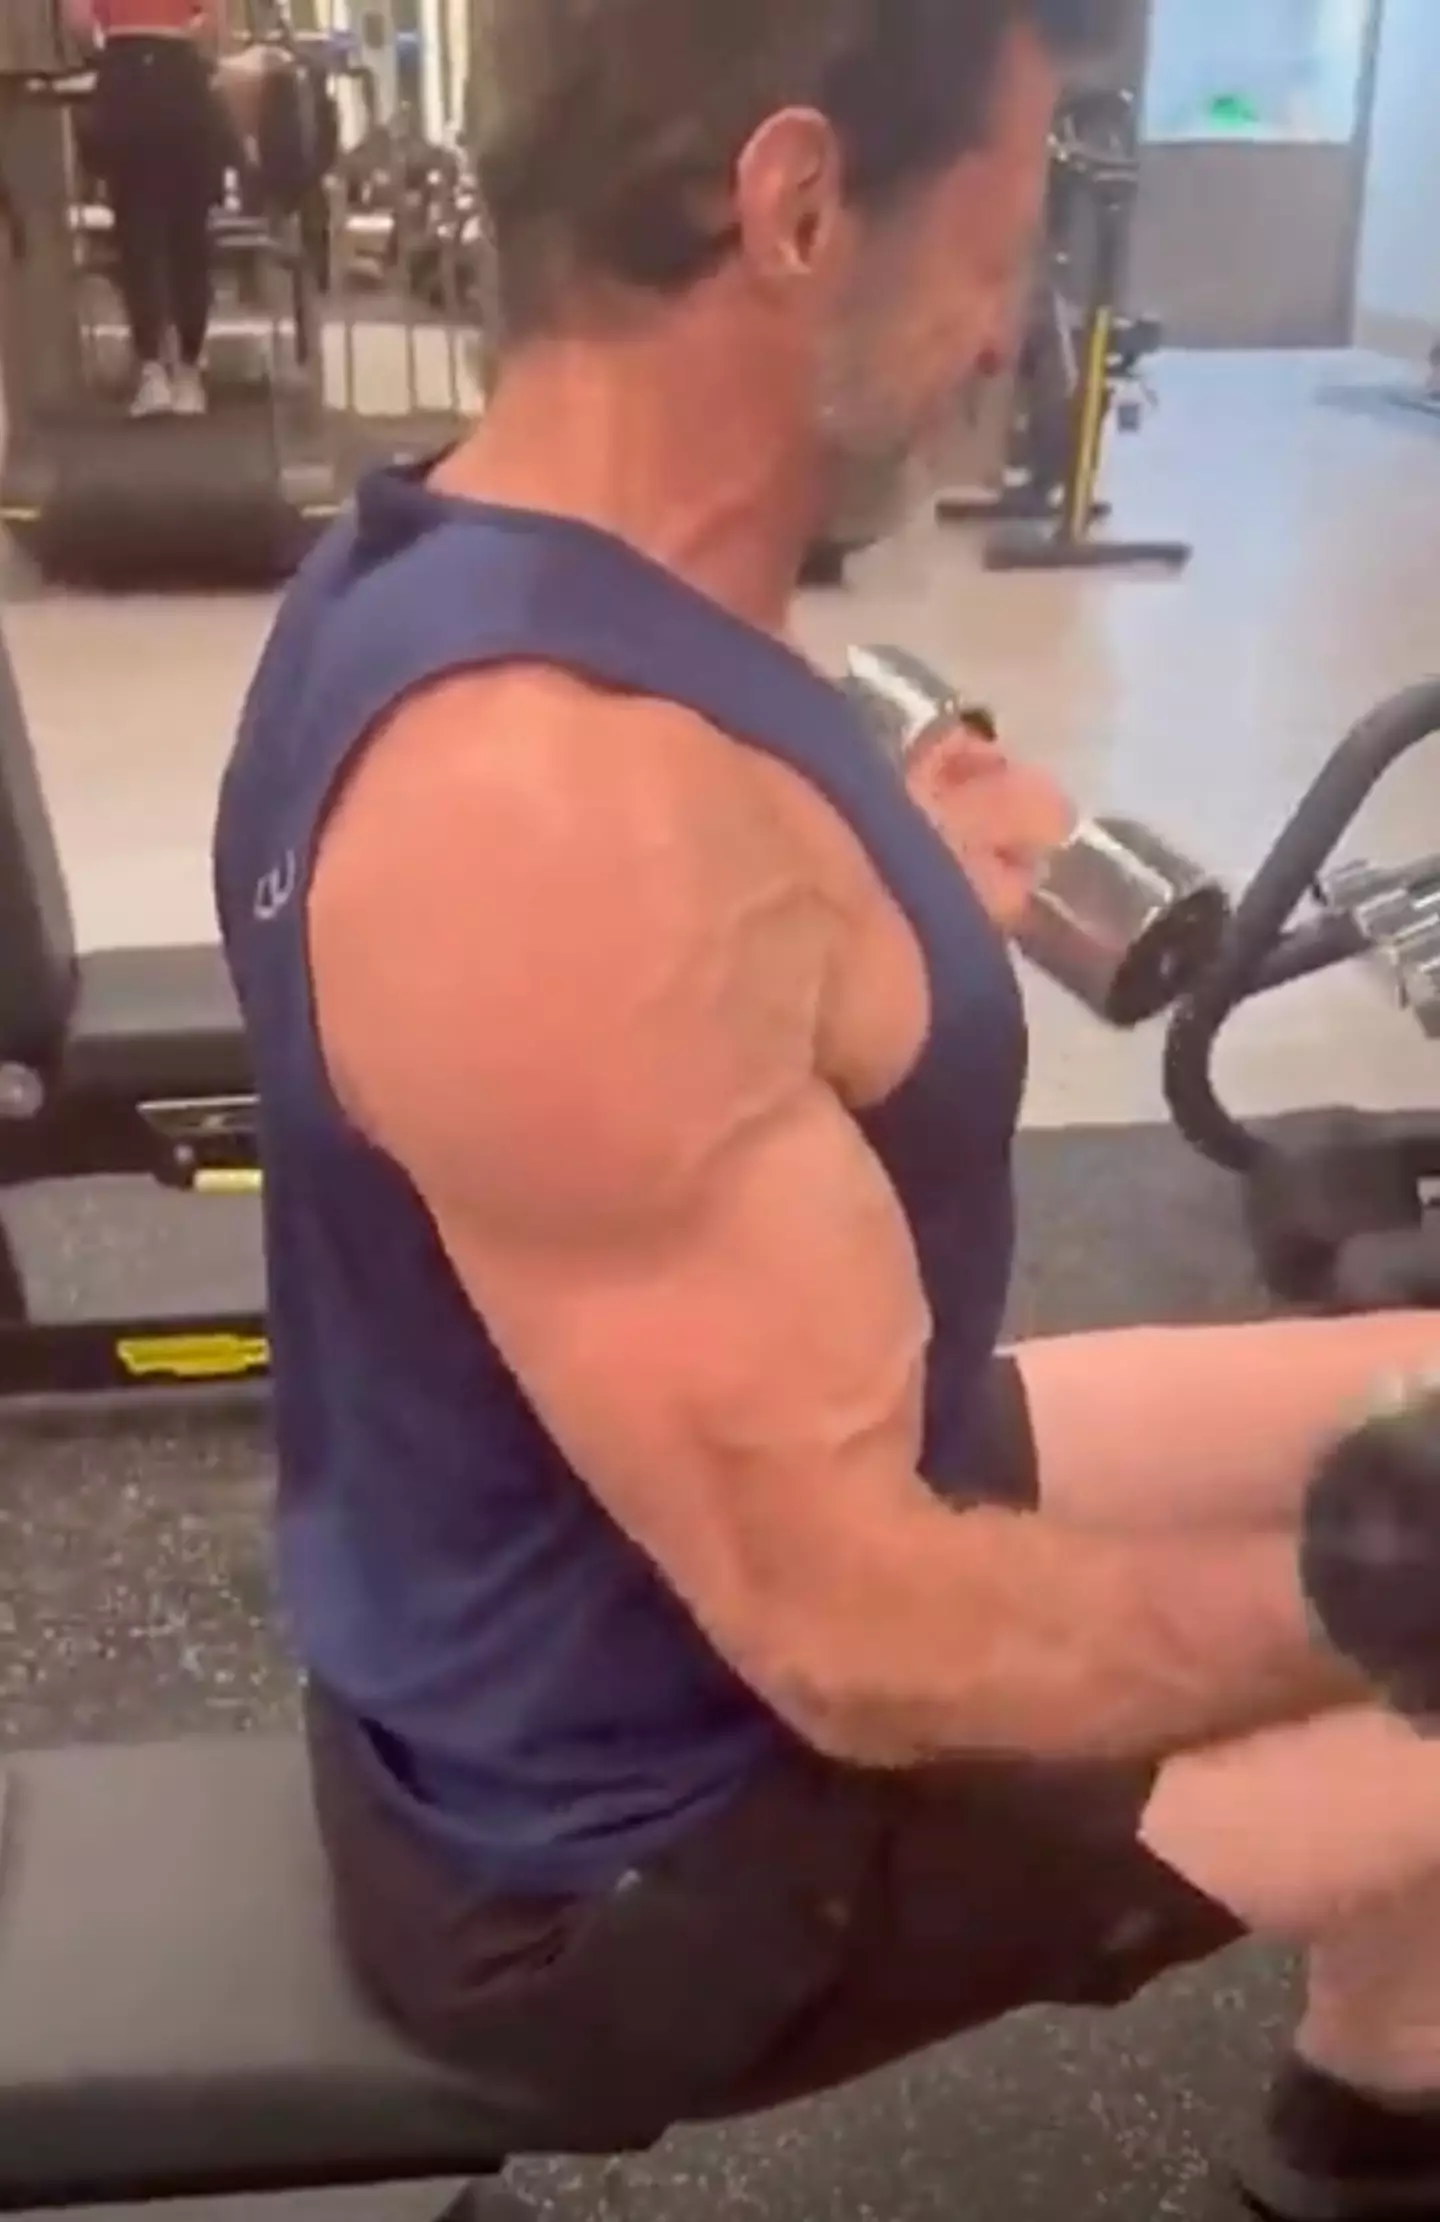 Hugh Jackman got ripped one more time for the role of Wolverine.